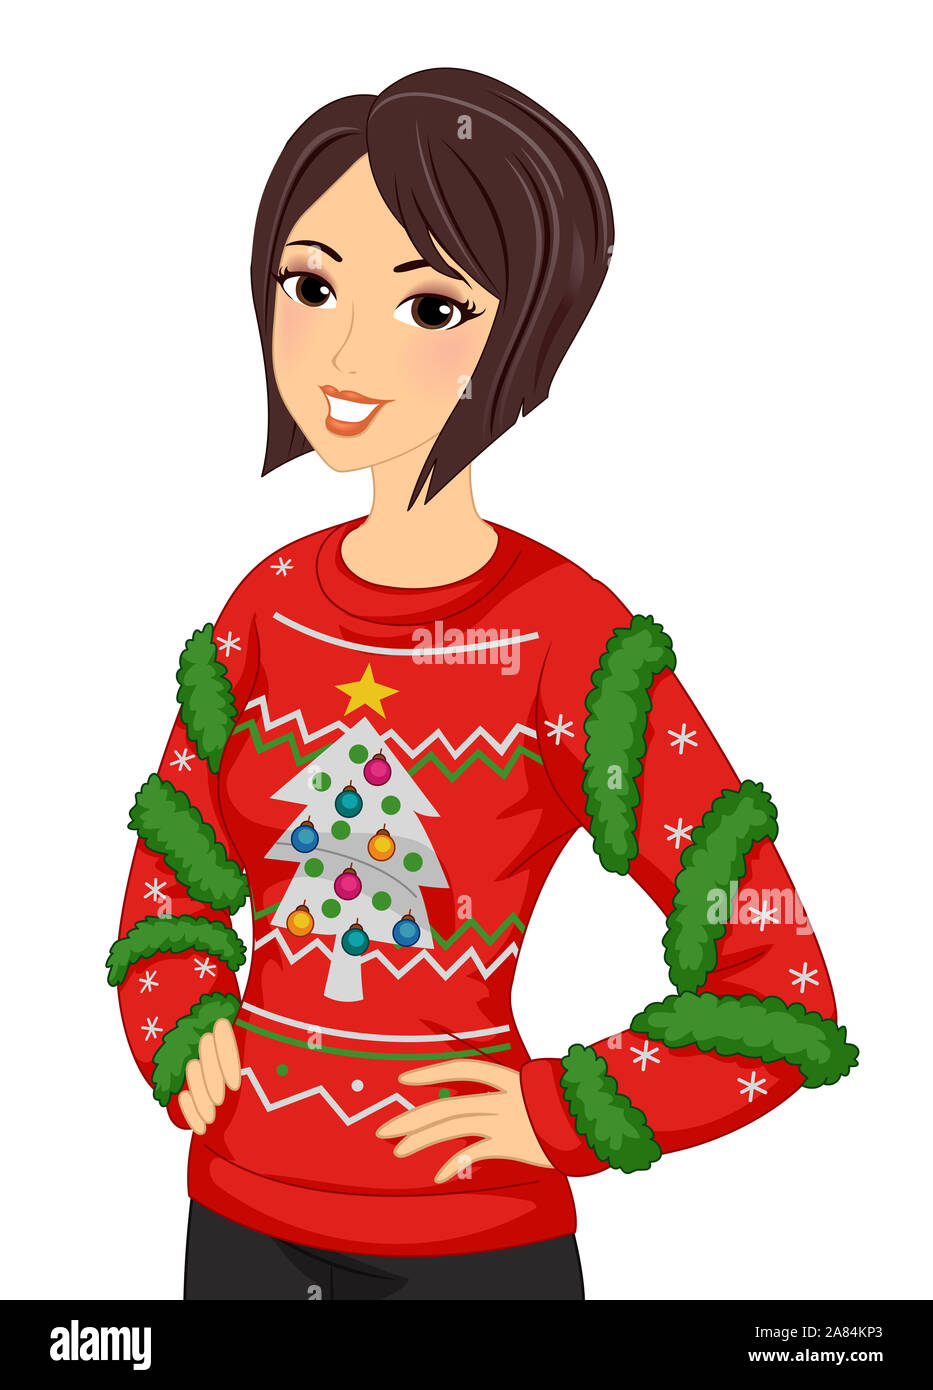 Ugly Sweater Stock Vector Illustration and Royalty Free Ugly Sweater Clipart